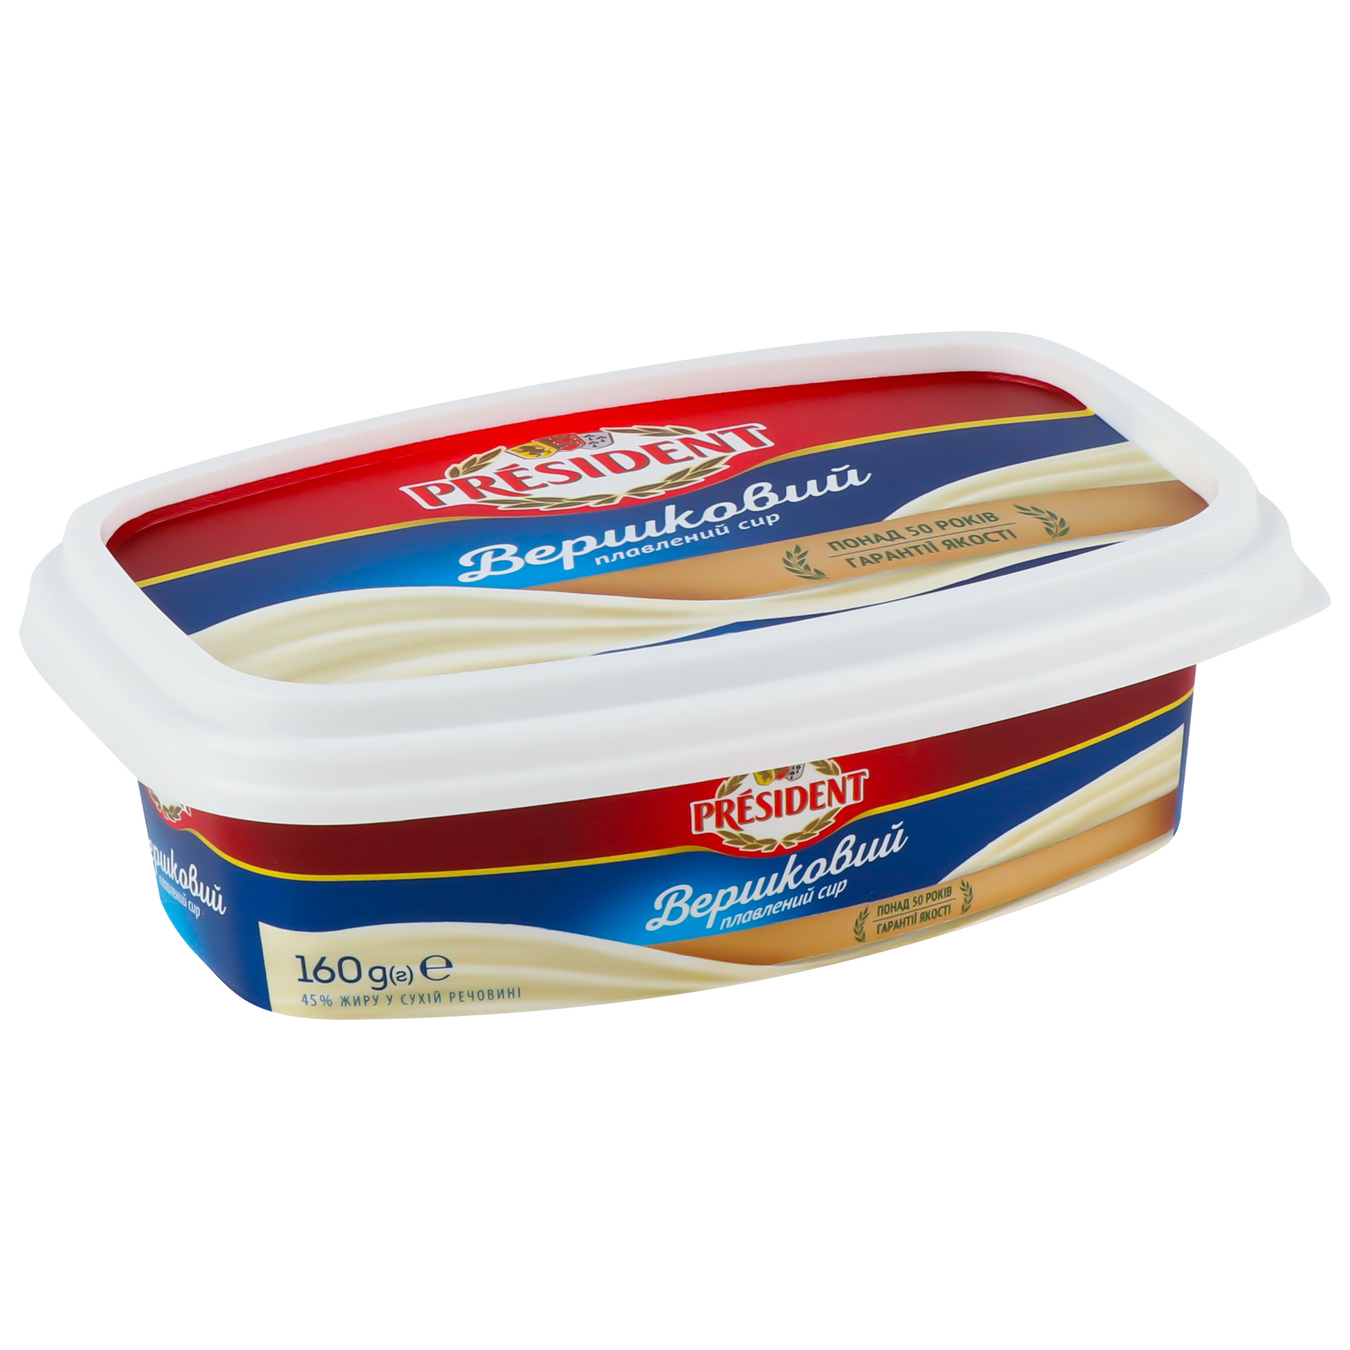 President processed cheese Creamy 45% 160g 2